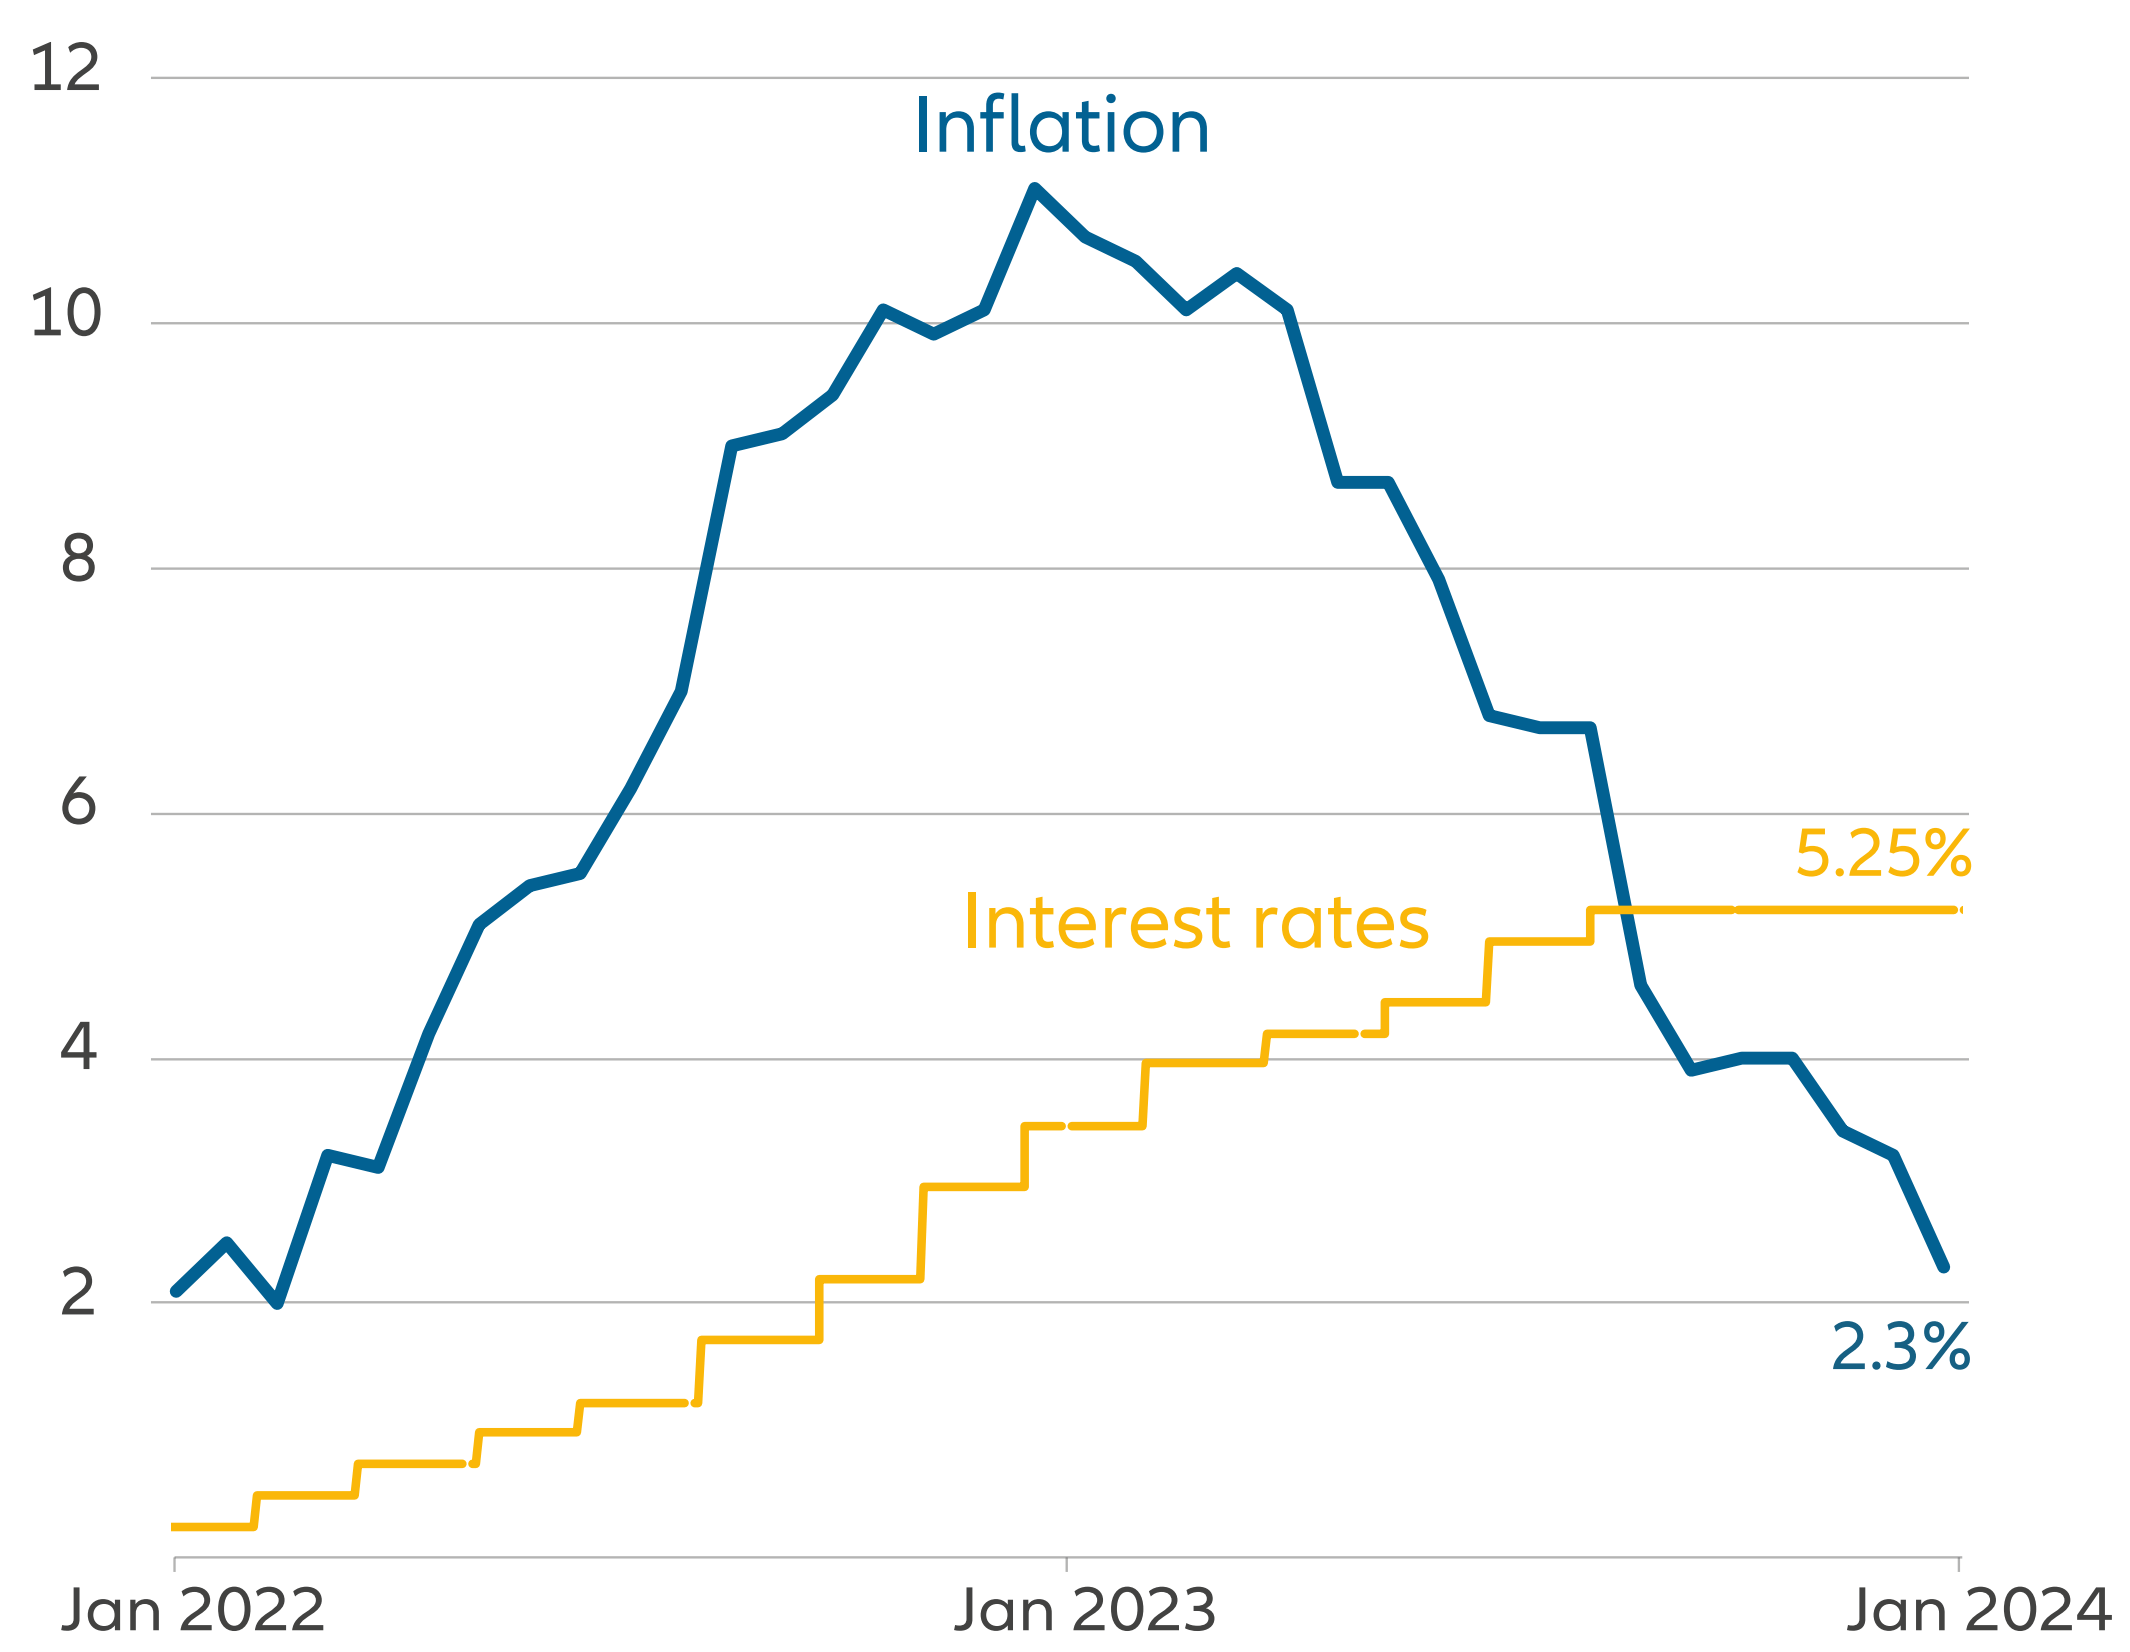 Exhibit 1: UK inflation and interest rates